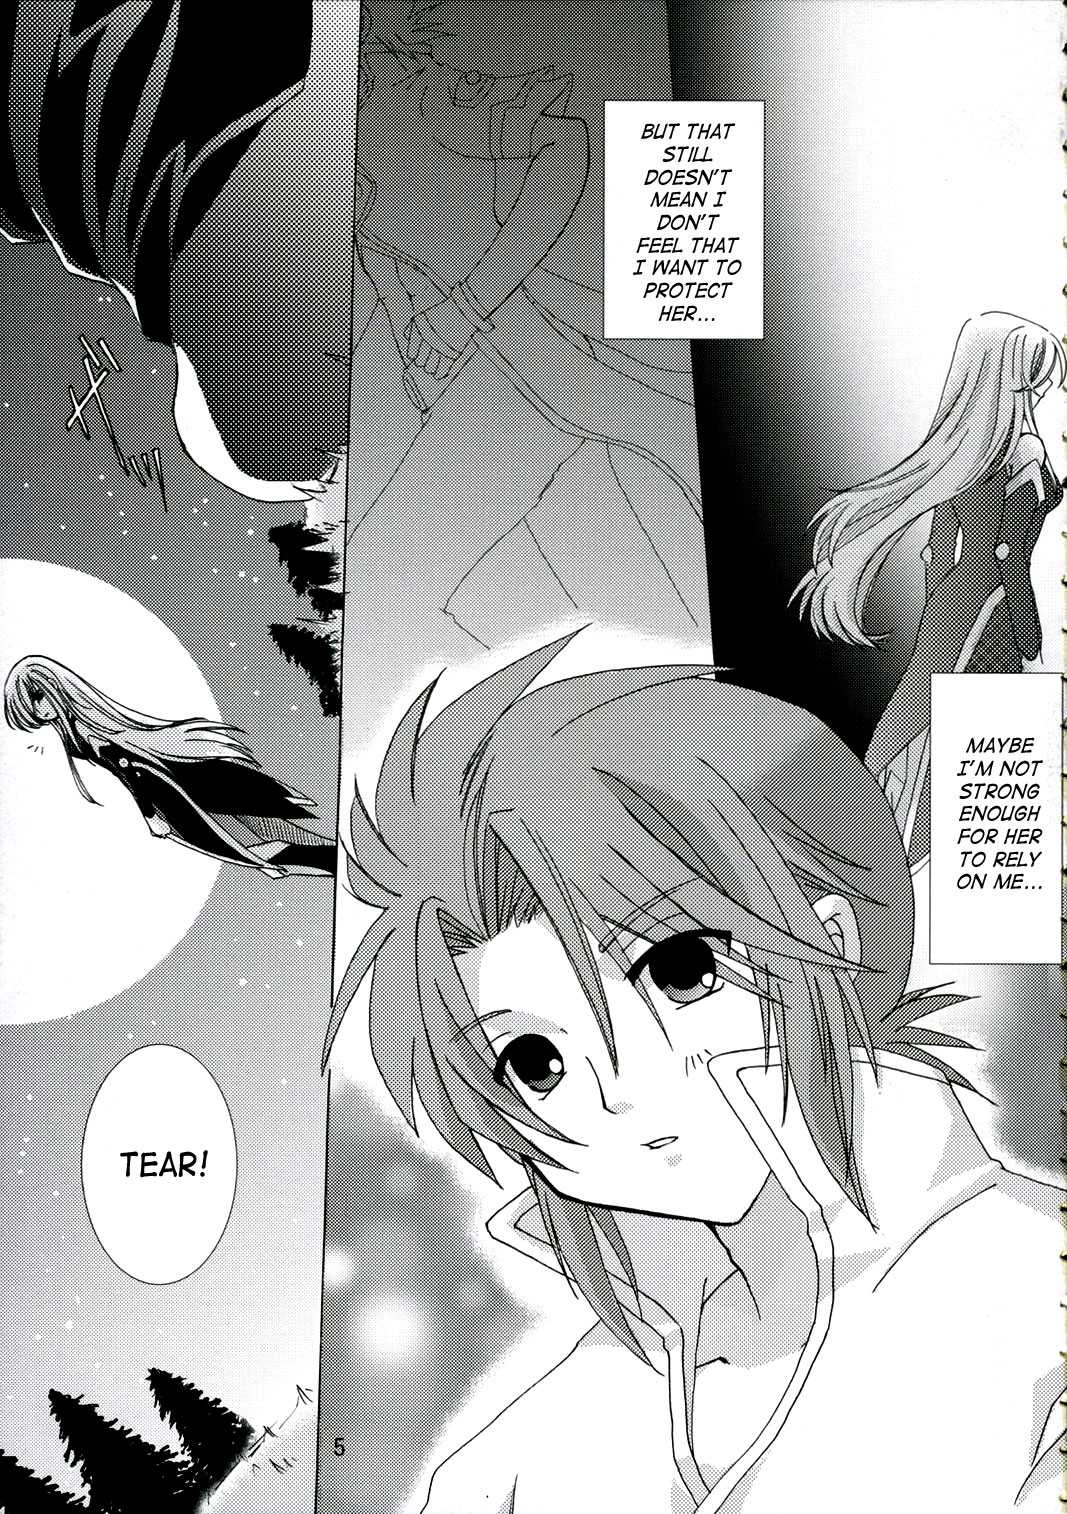 [Kyougoku Akira] Great Tear Breasts (Tales of the Abyss) [ENG] 